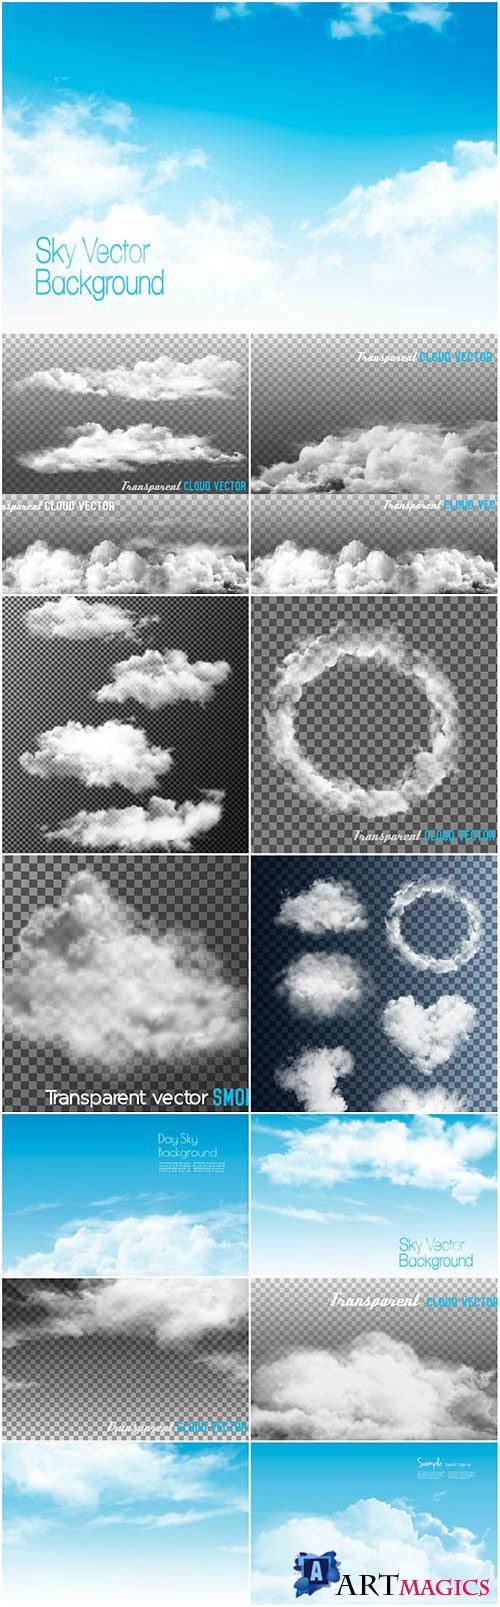 Clouds, storm clouds, sky vector illustration